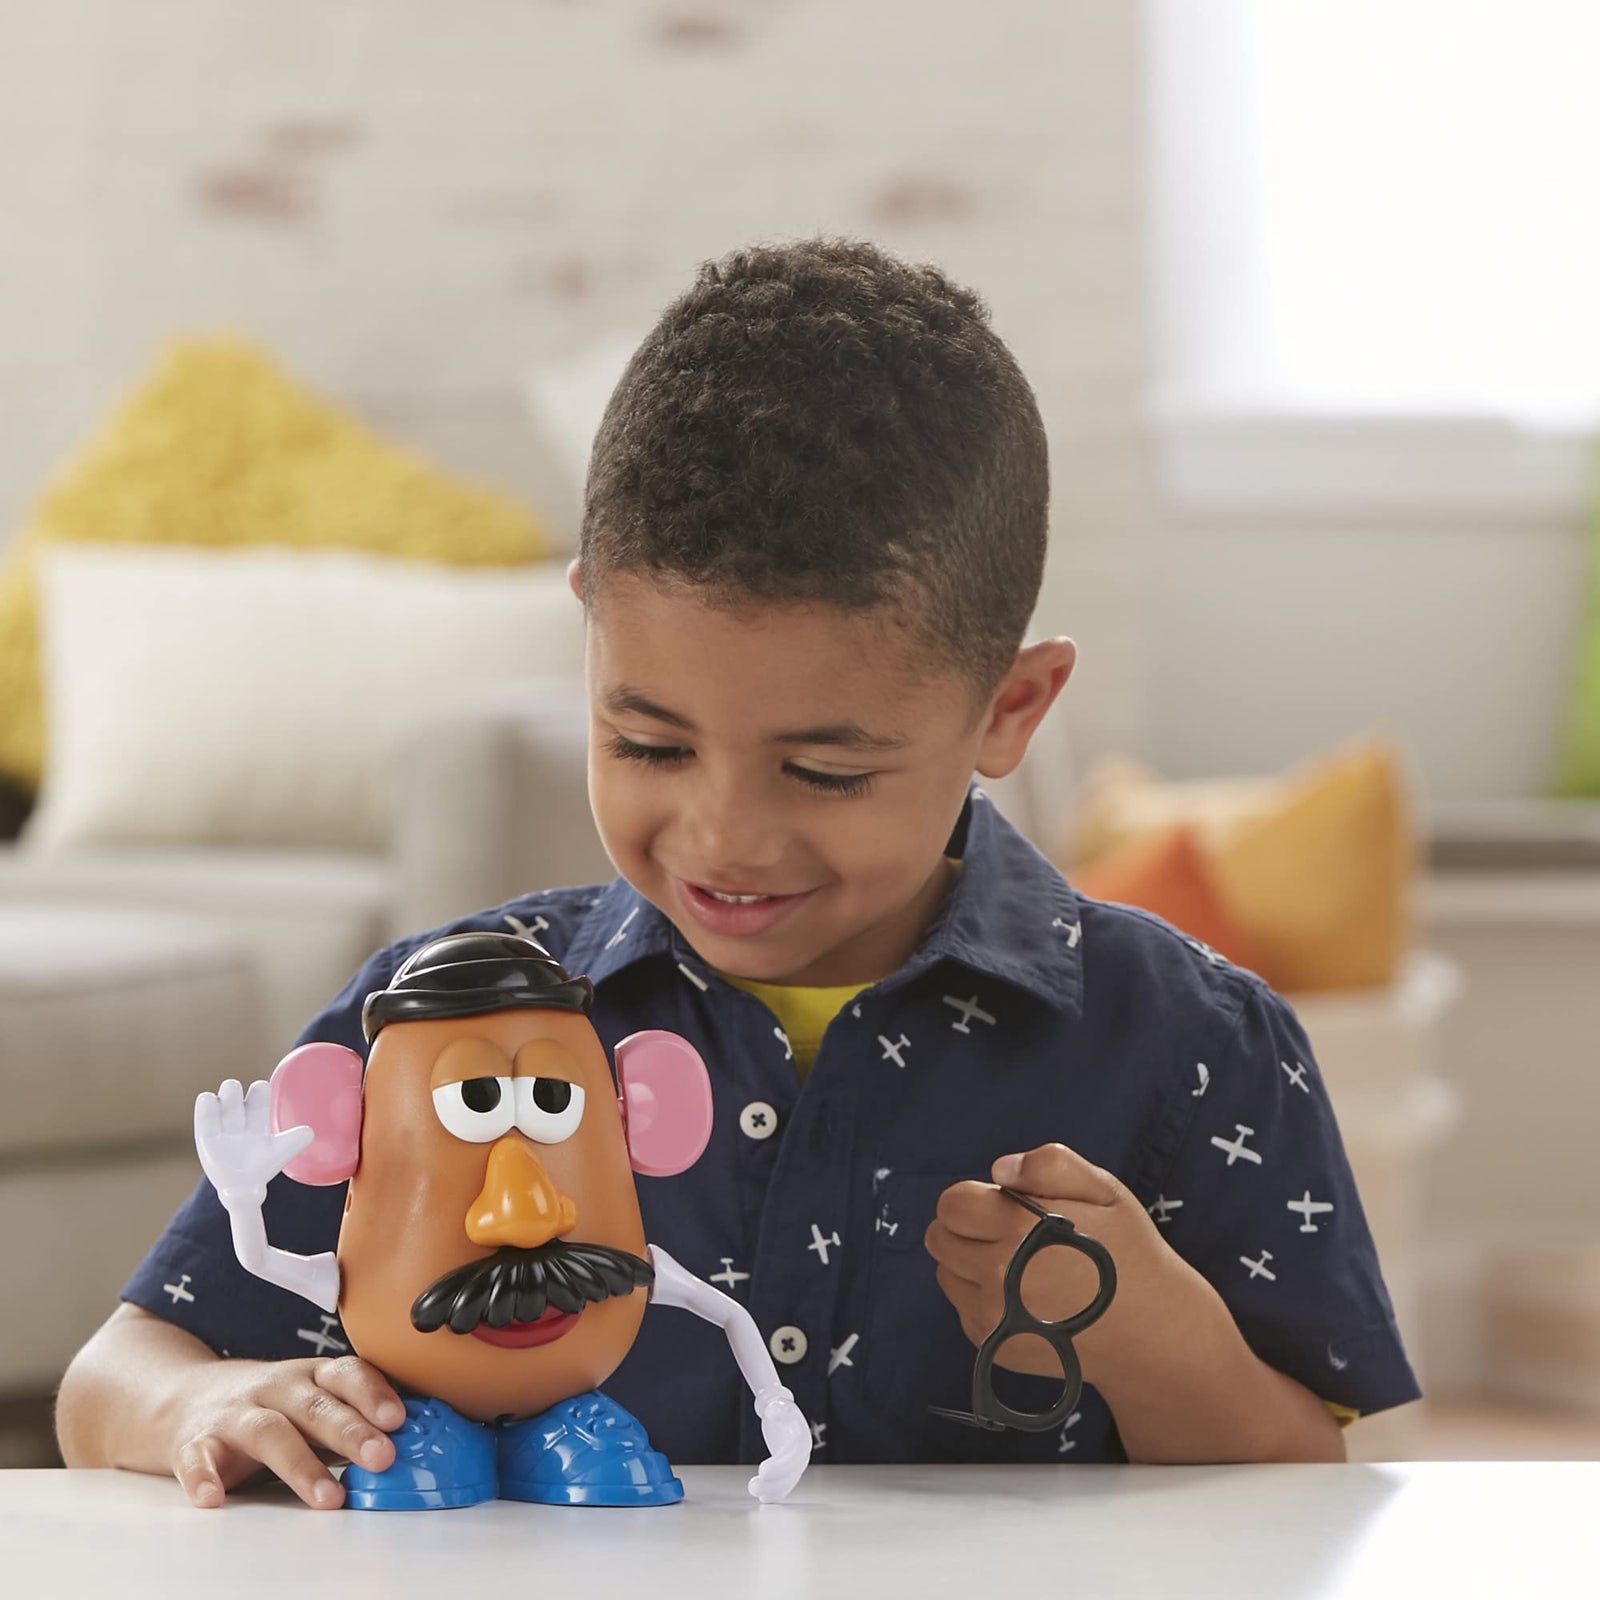 Mr Potato Head Disney/Pixar Toy Story 4 Classic Figure Toy for Kids Ages 2 and Up